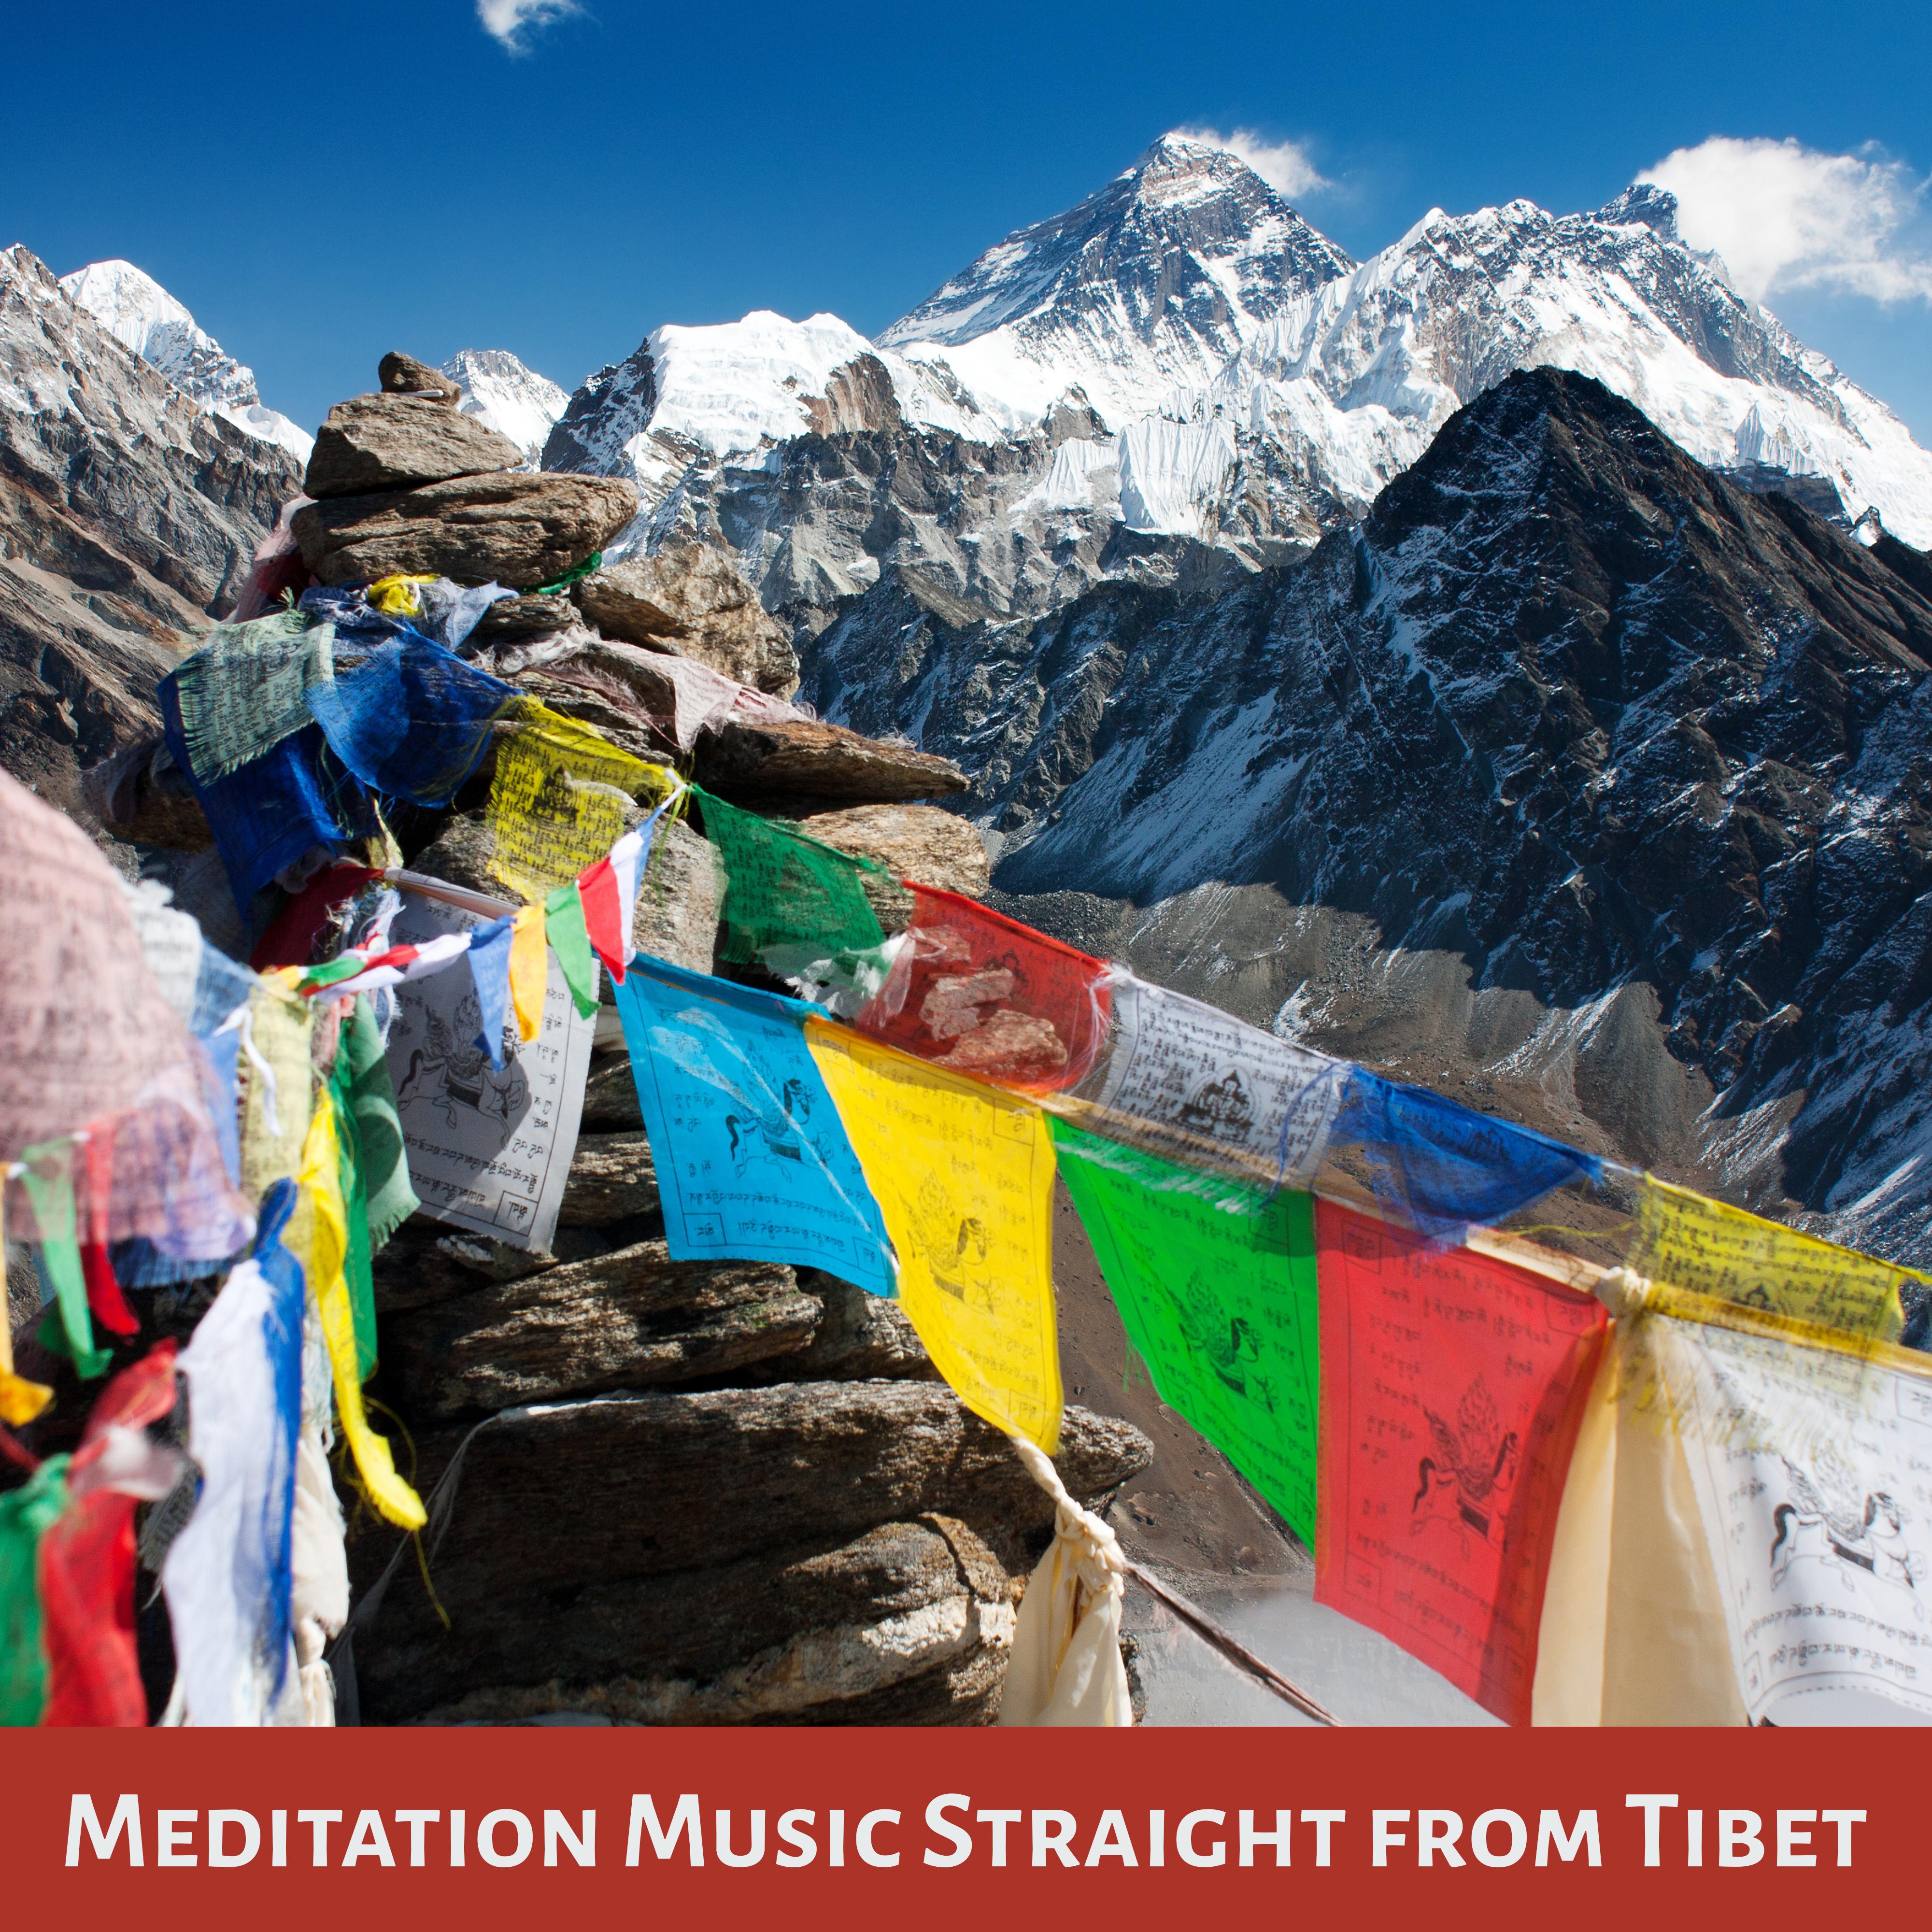 Meditation Music Straight from Tibet: 2019 Deep Ambient New Age Music for Yoga & Relaxation, Buddha Lounge, Asian Zen Mantra, Healing Sounds